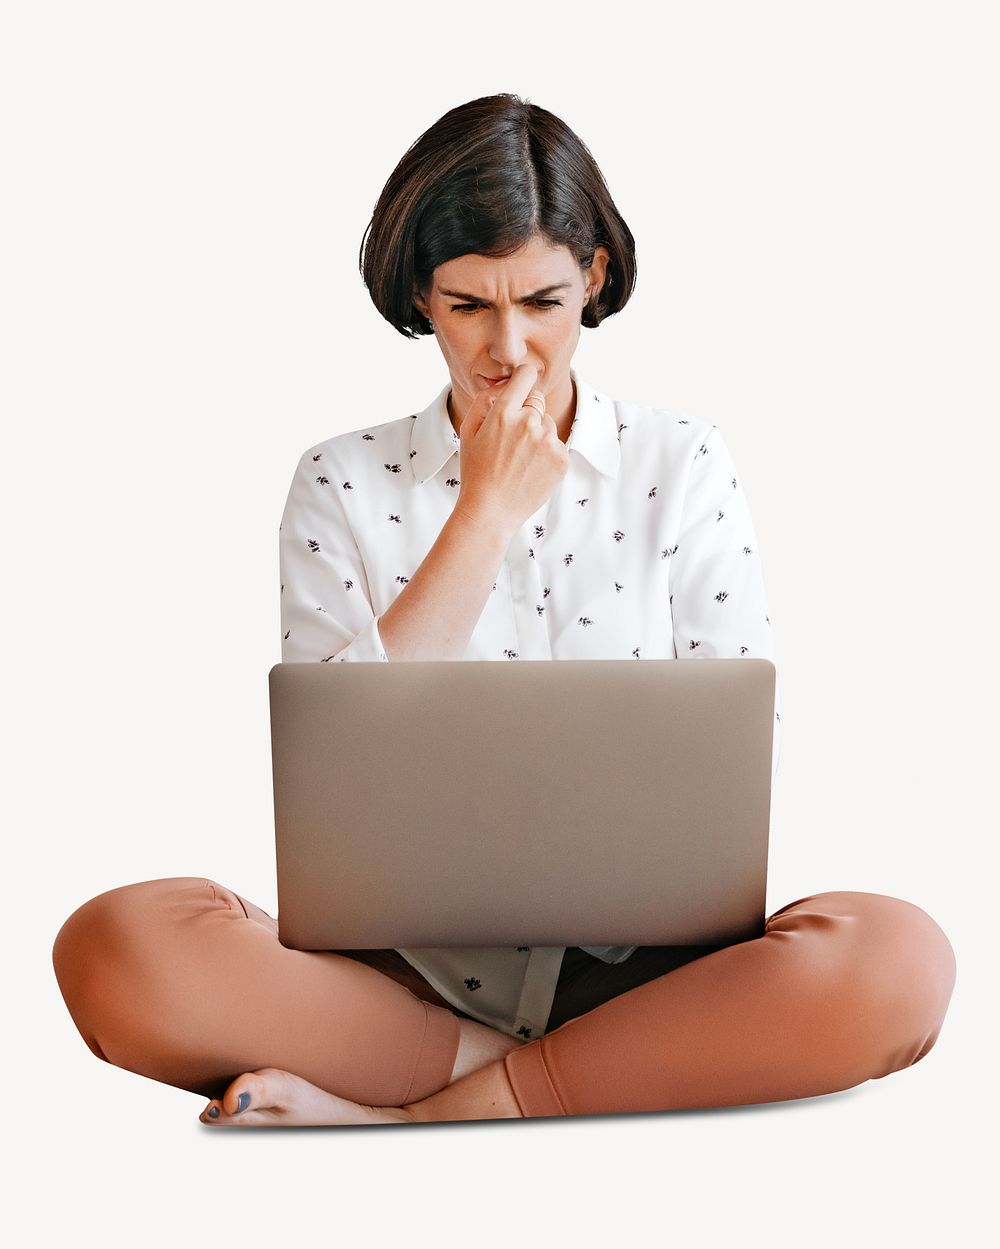 Remote hard-working woman  isolated image